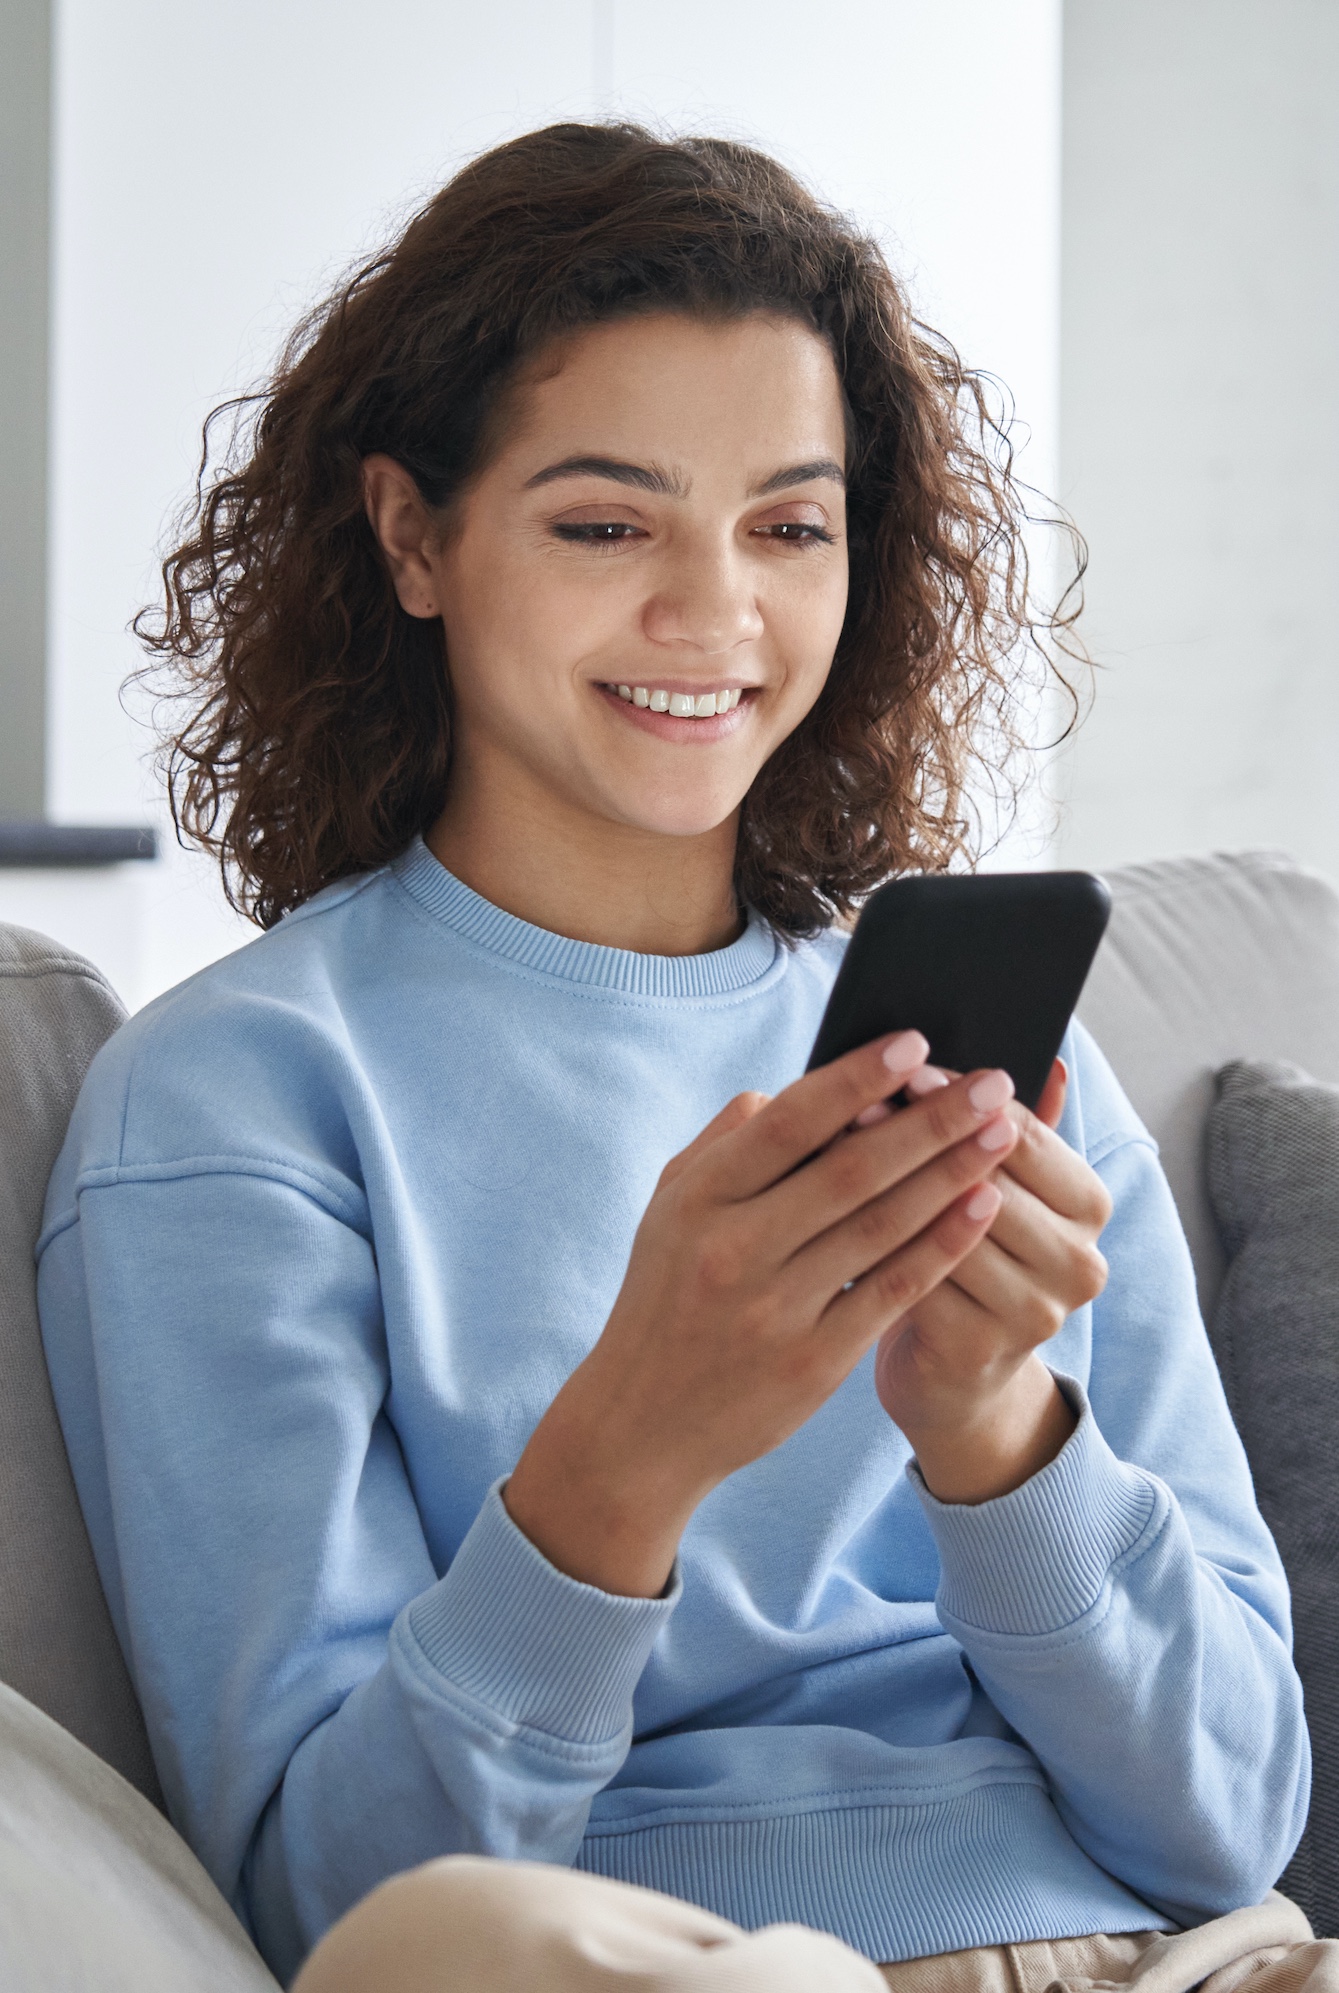 Woman on couch smiling looking at smart phone